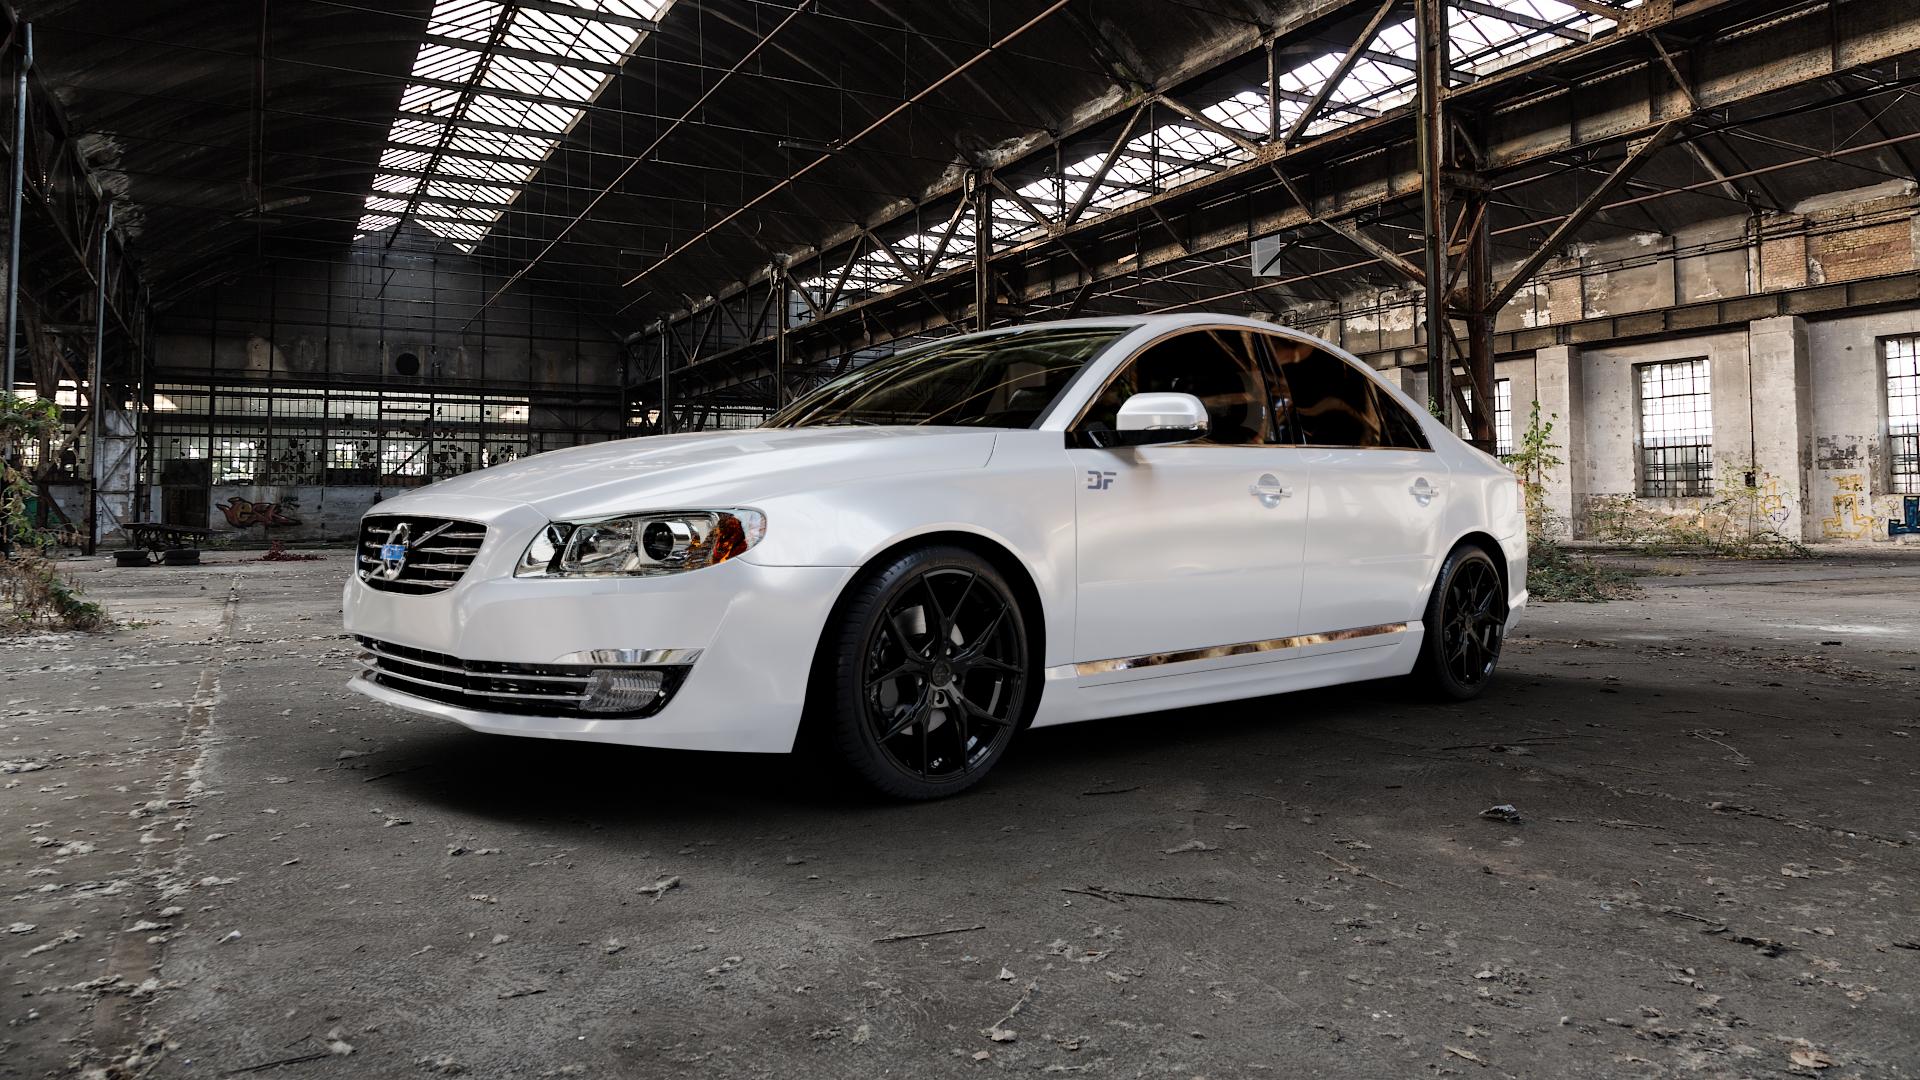 Volvo S80 II Type A 3,2l AWD 179kW (243 hp) Wheels and Tyre Packages